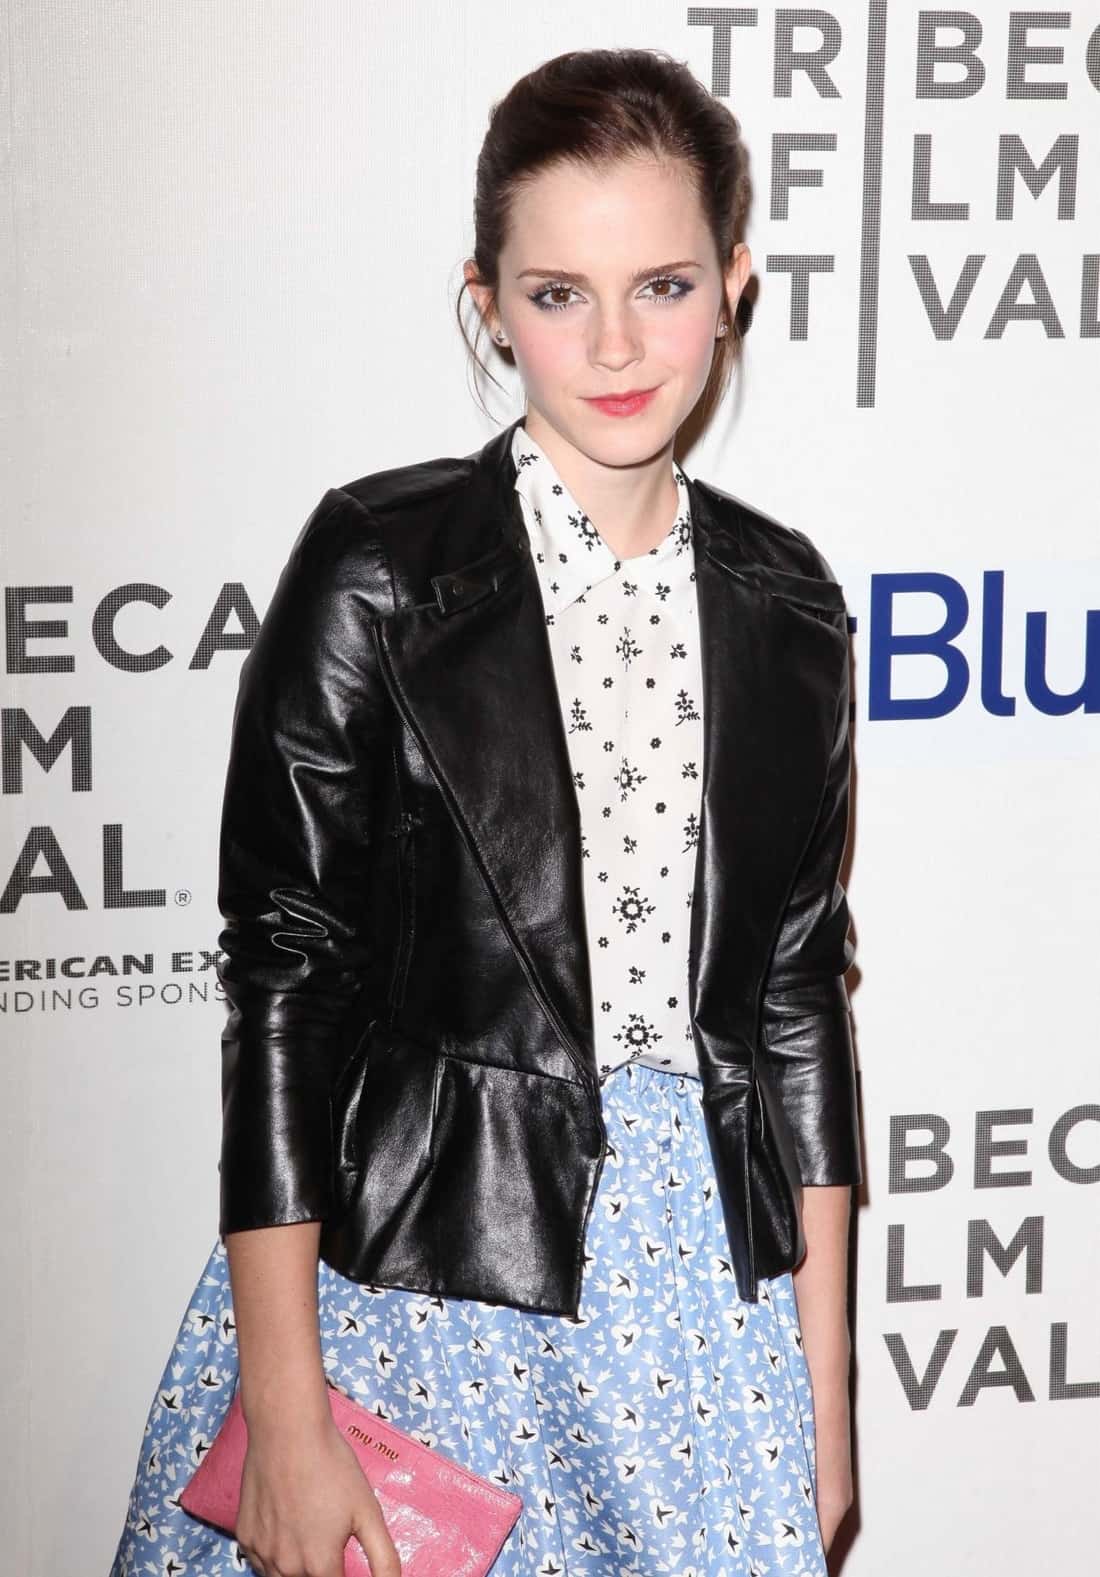 Emma Watson Wore a Daring Blue Skirt at the "Struck By Lightning" Premiere